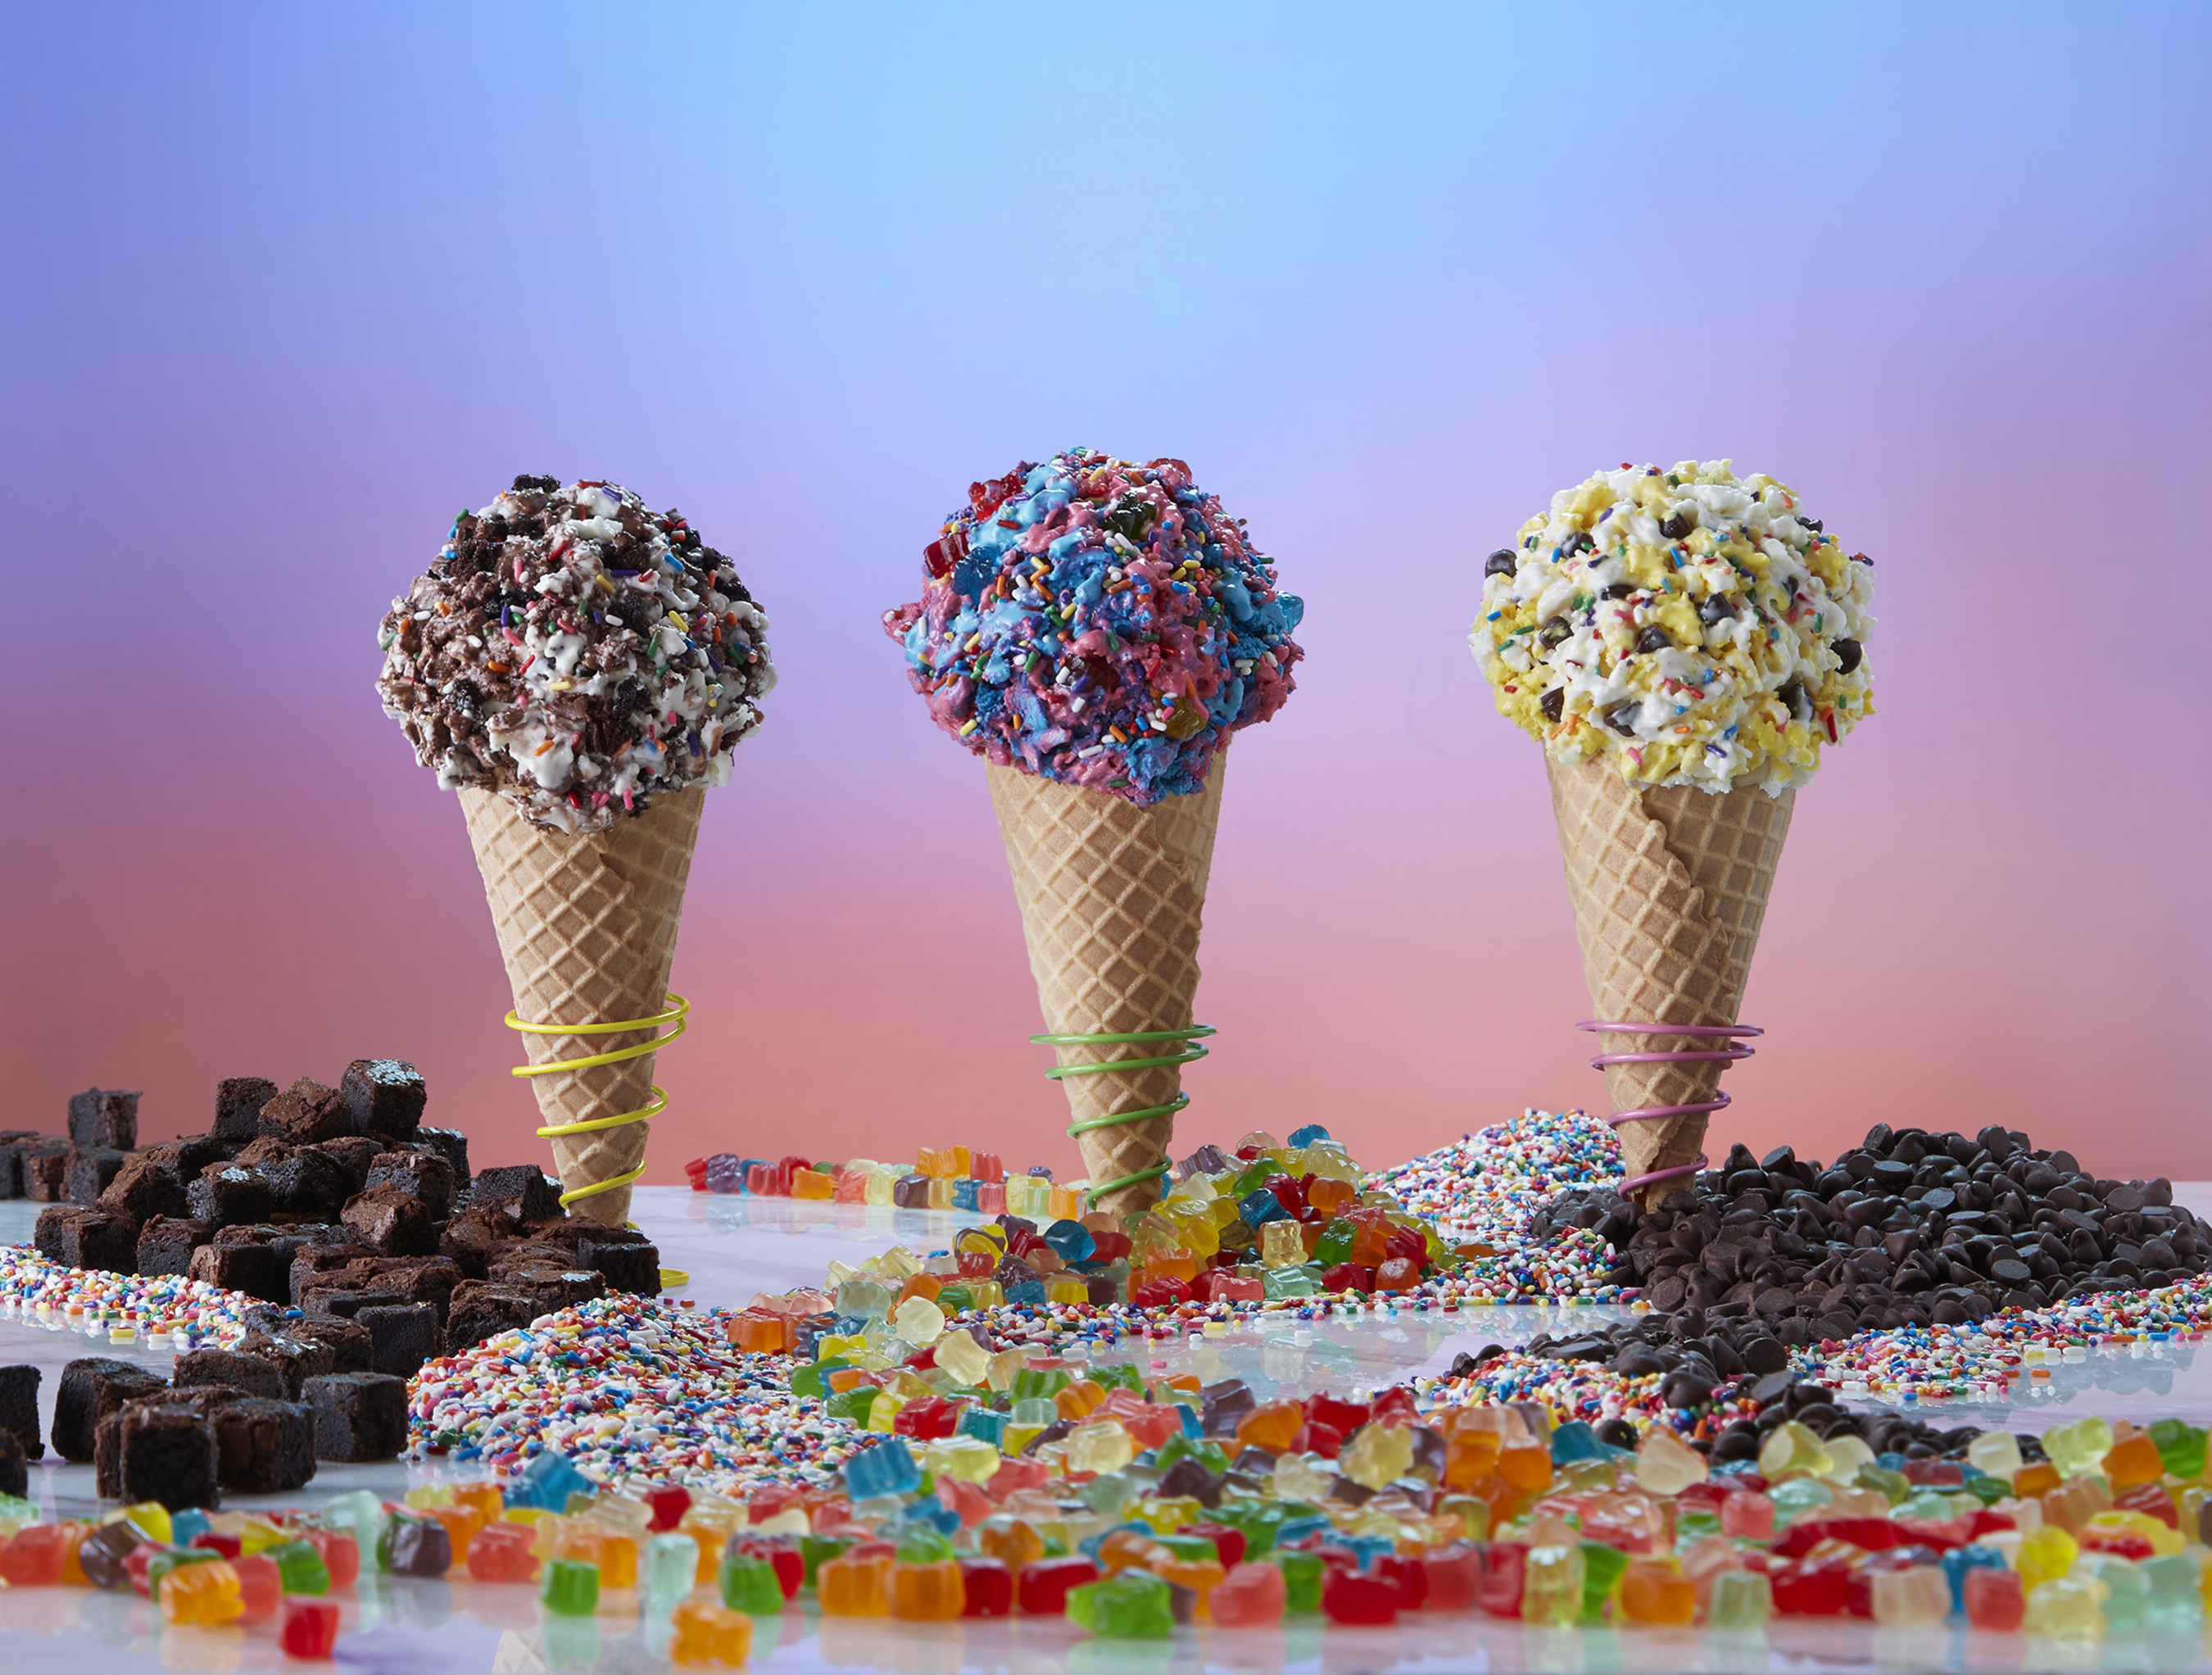 Marble Slab Creamery Introduces Candy Crush Inspired Flavors